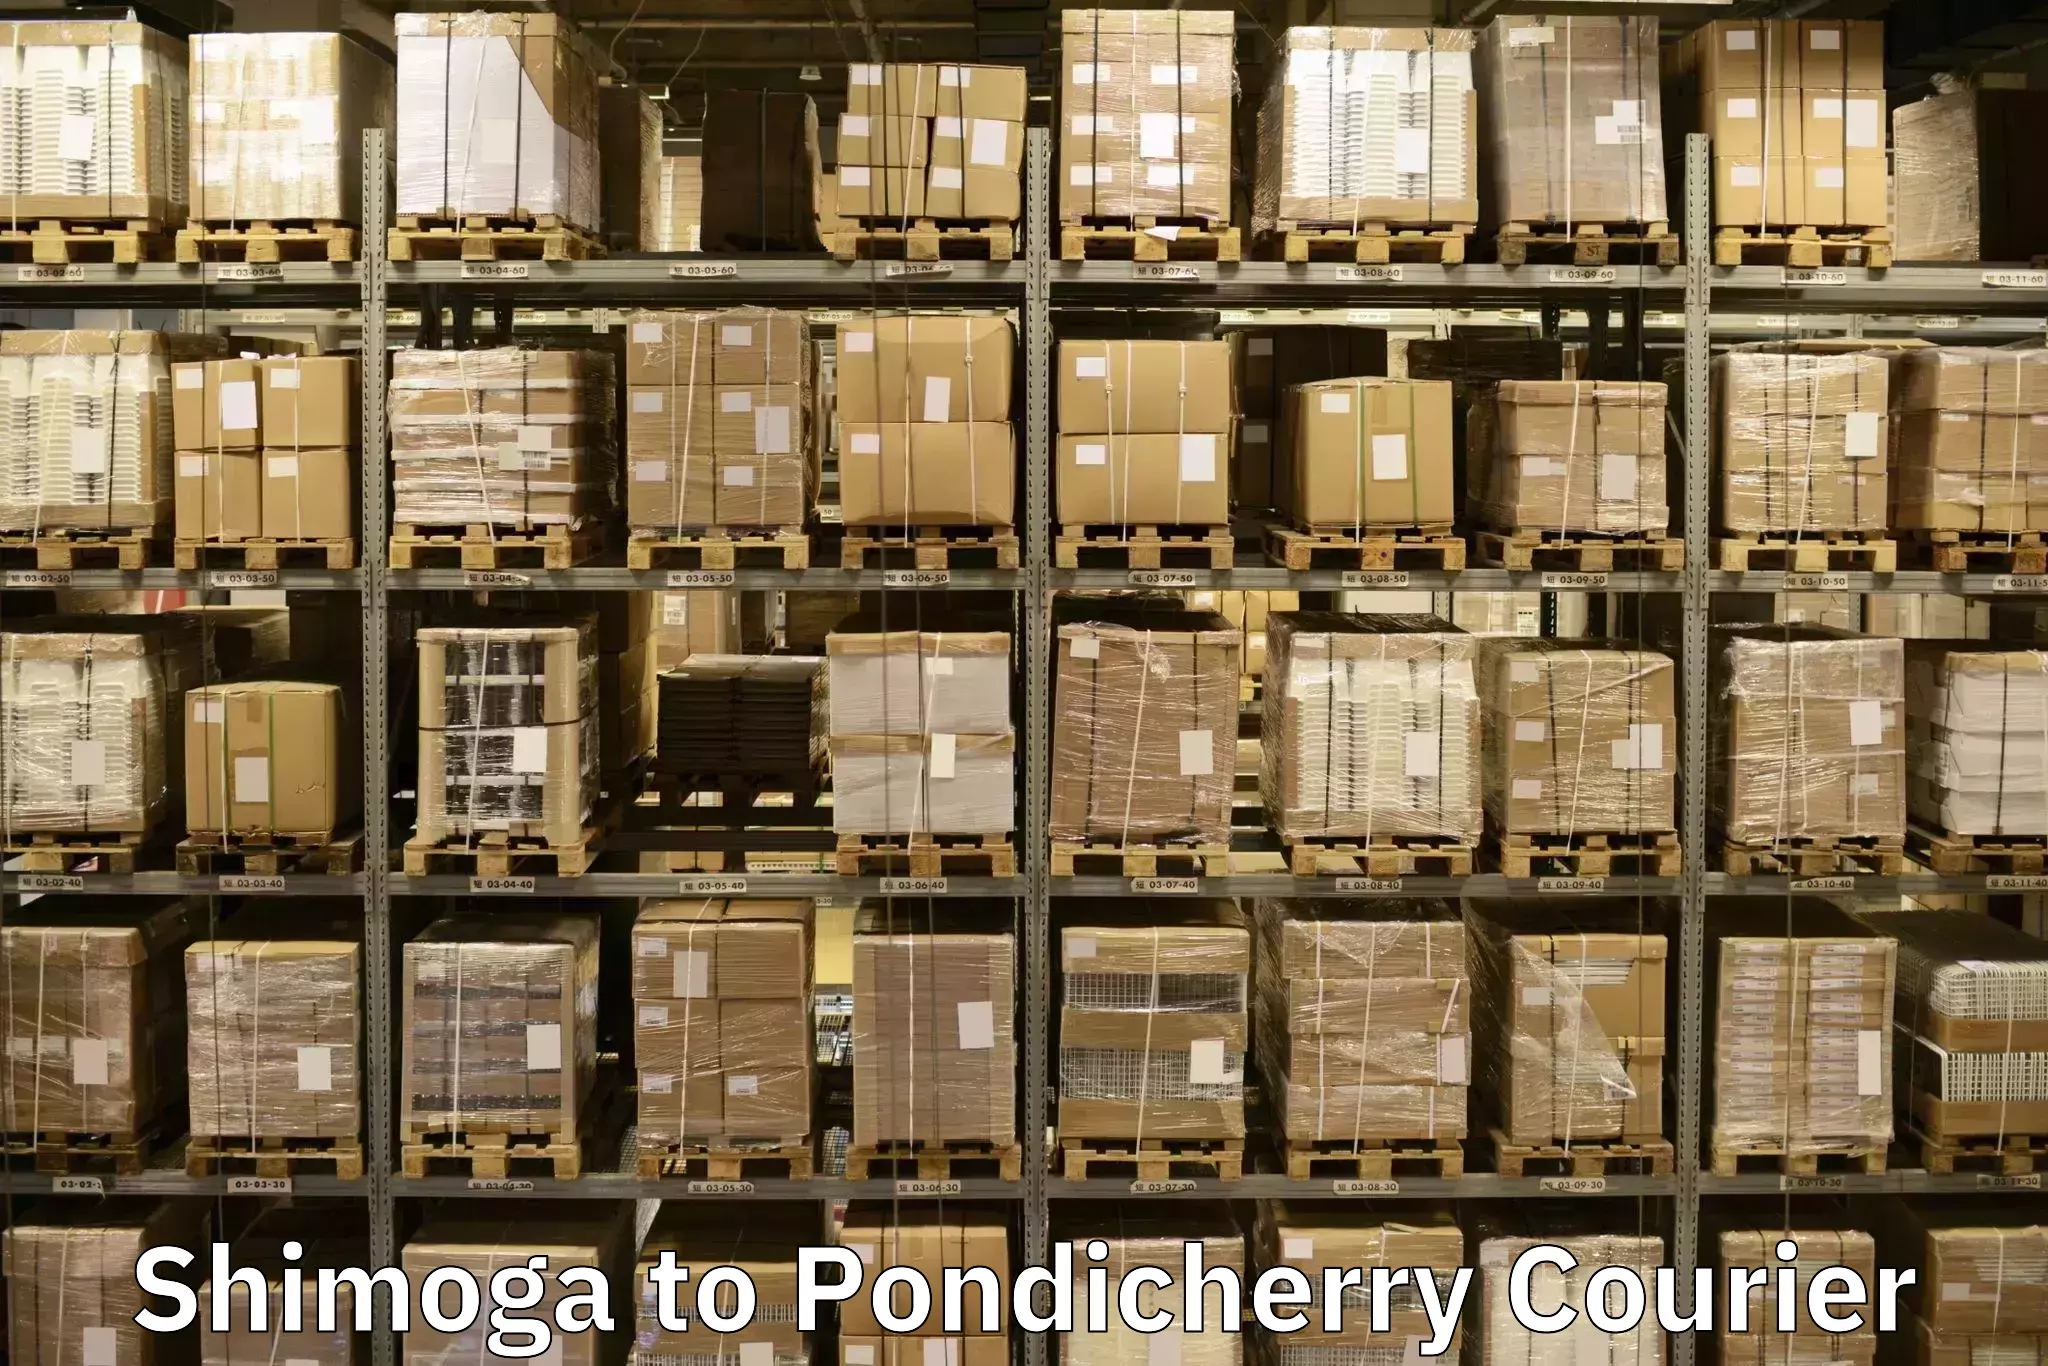 Moving and packing experts Shimoga to Pondicherry